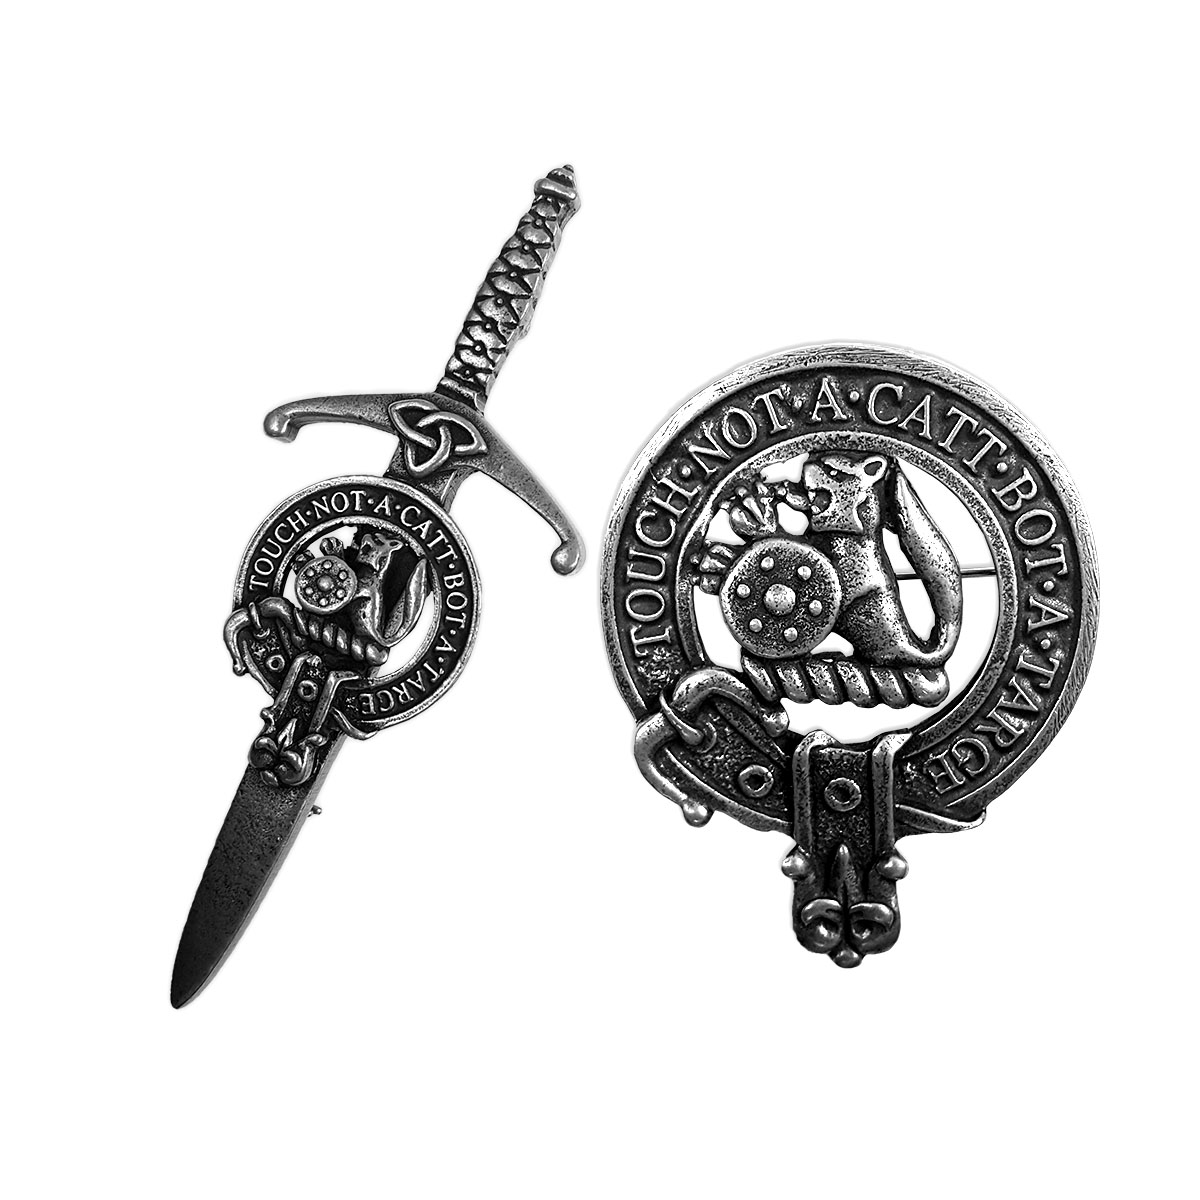 MacQueen Scottish Clan Crest Pewter Badge or Kilt Pin Ships free in US 